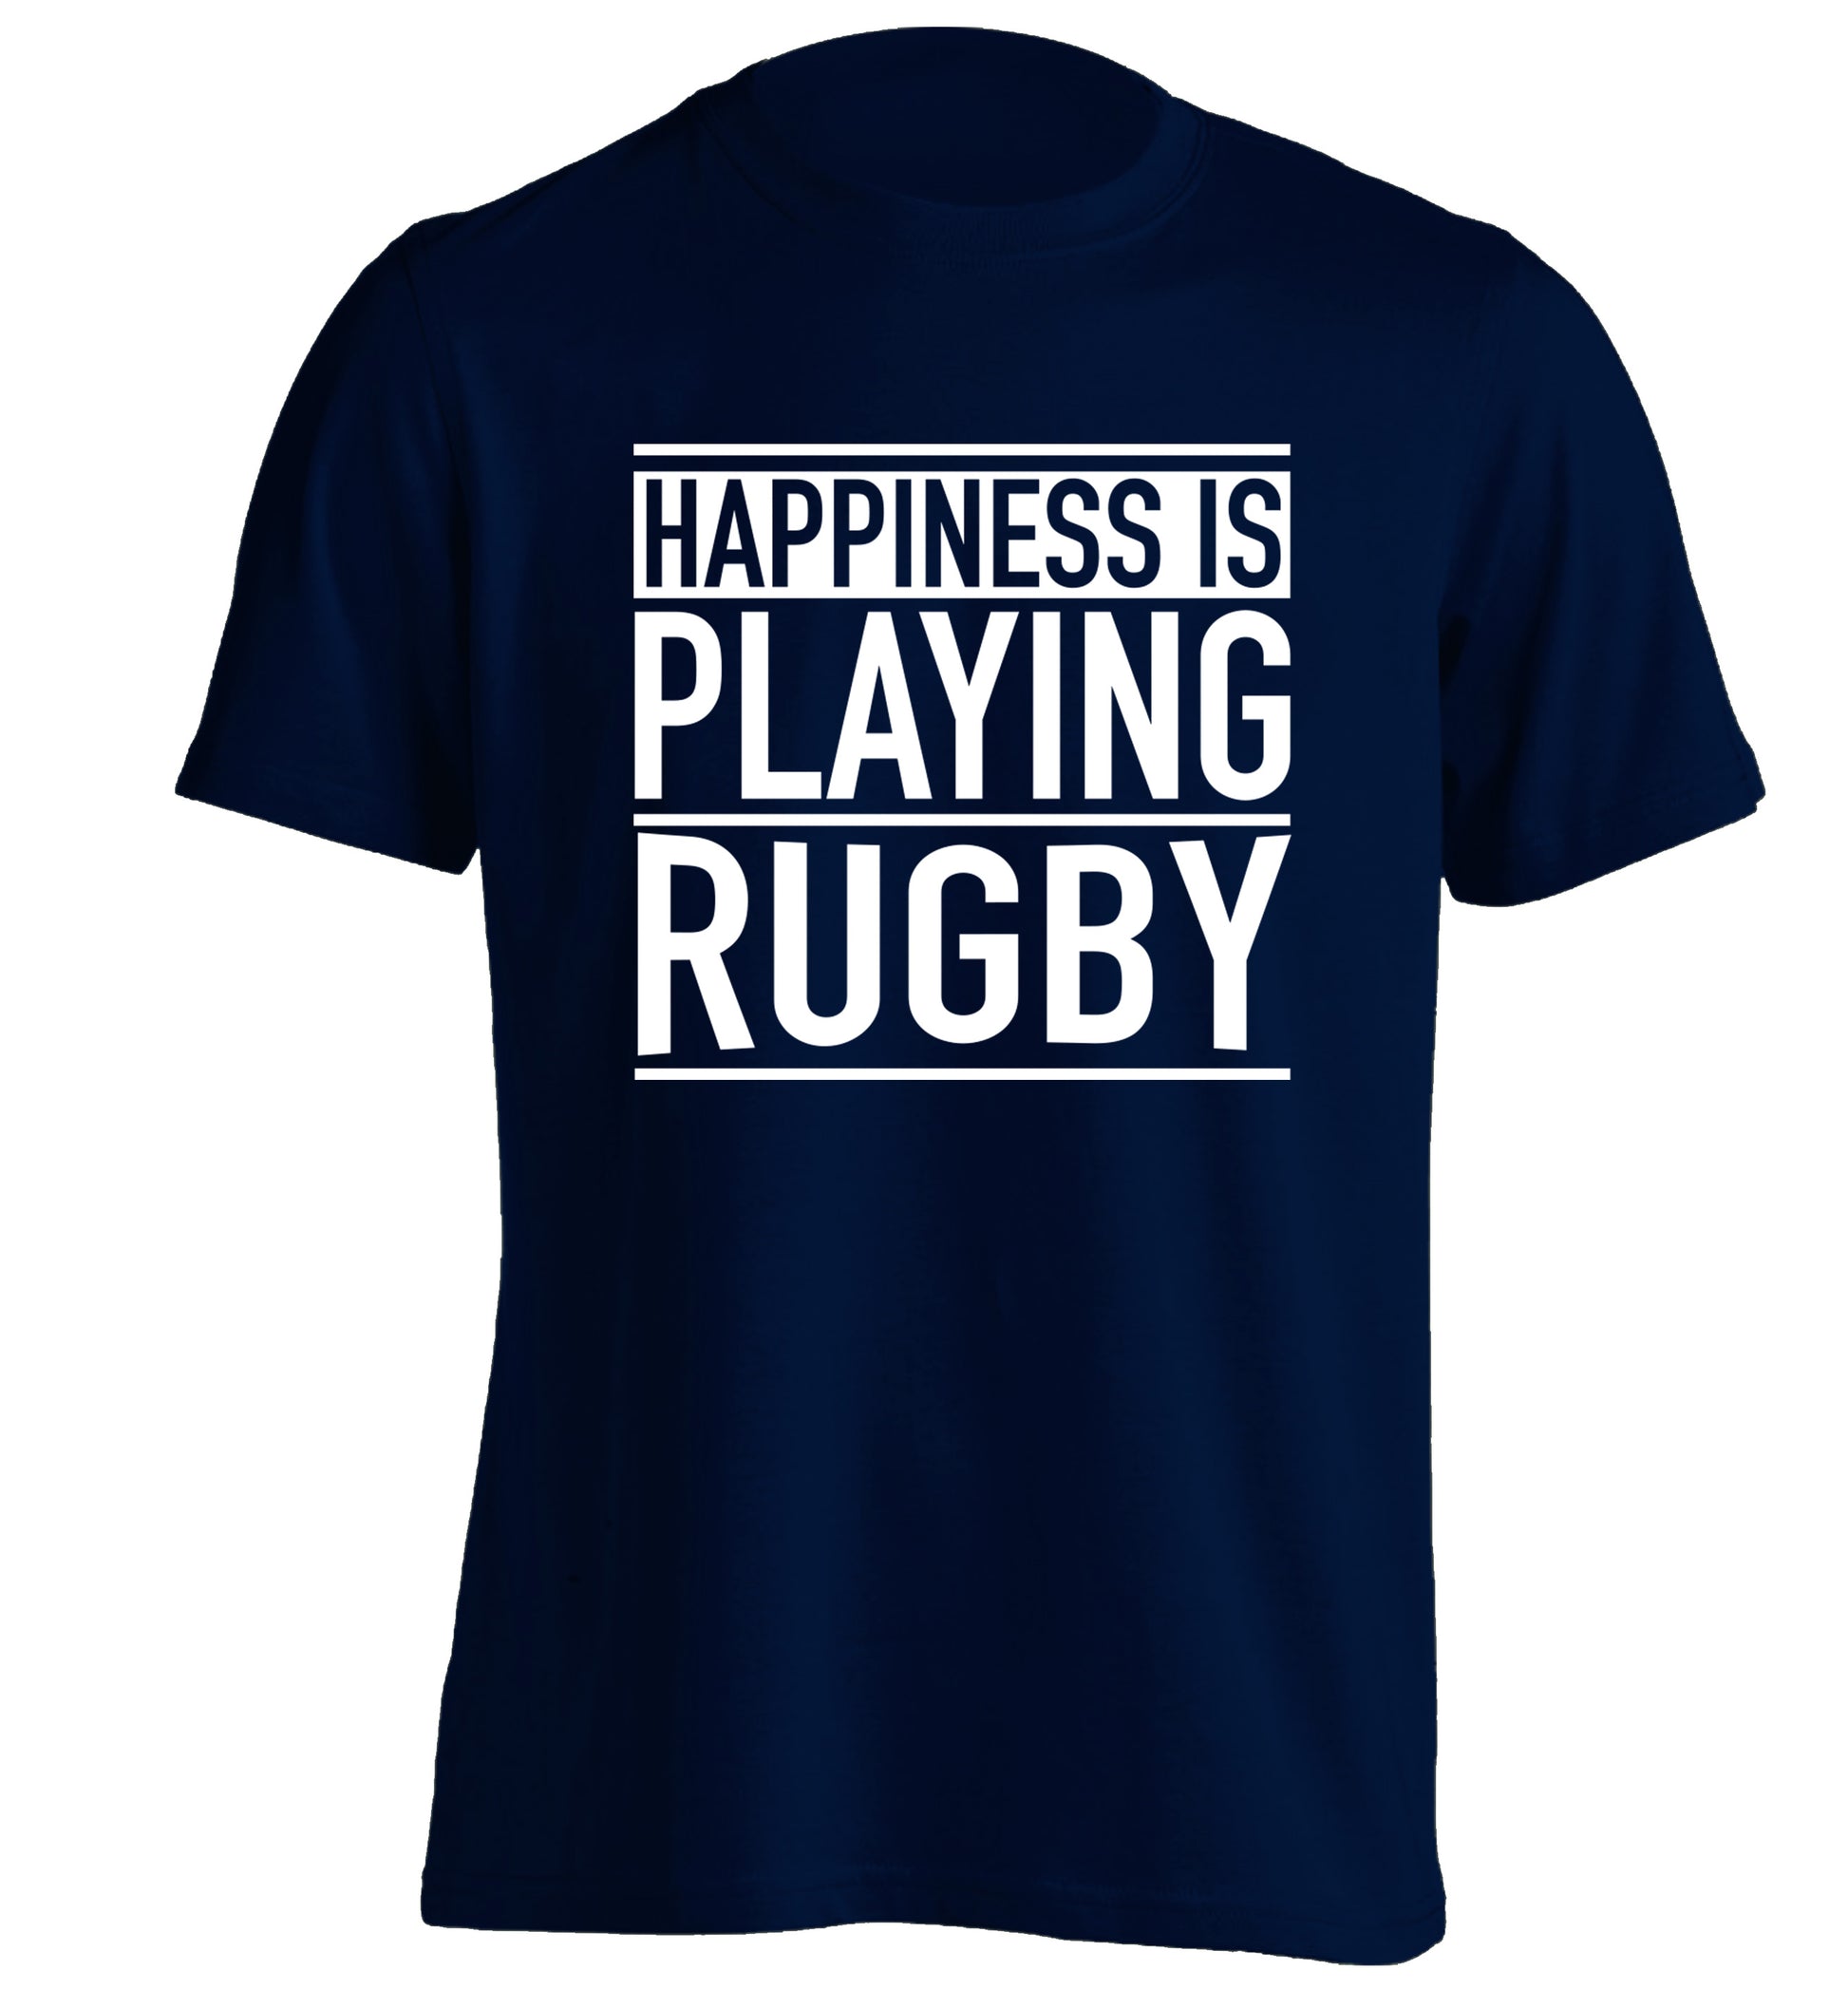 Happiness is playing rugby adults unisex navy Tshirt 2XL